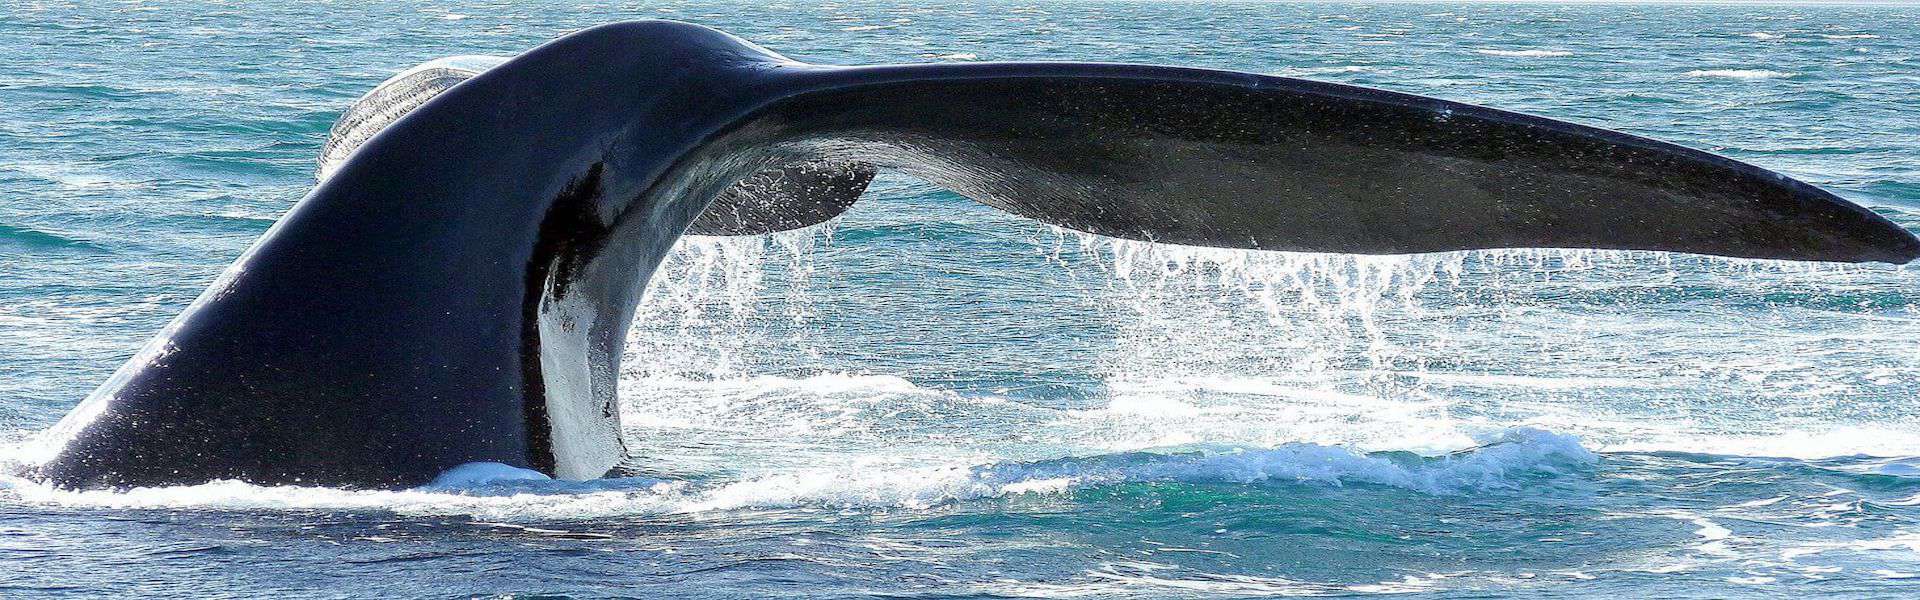 Whale tail in the ocean